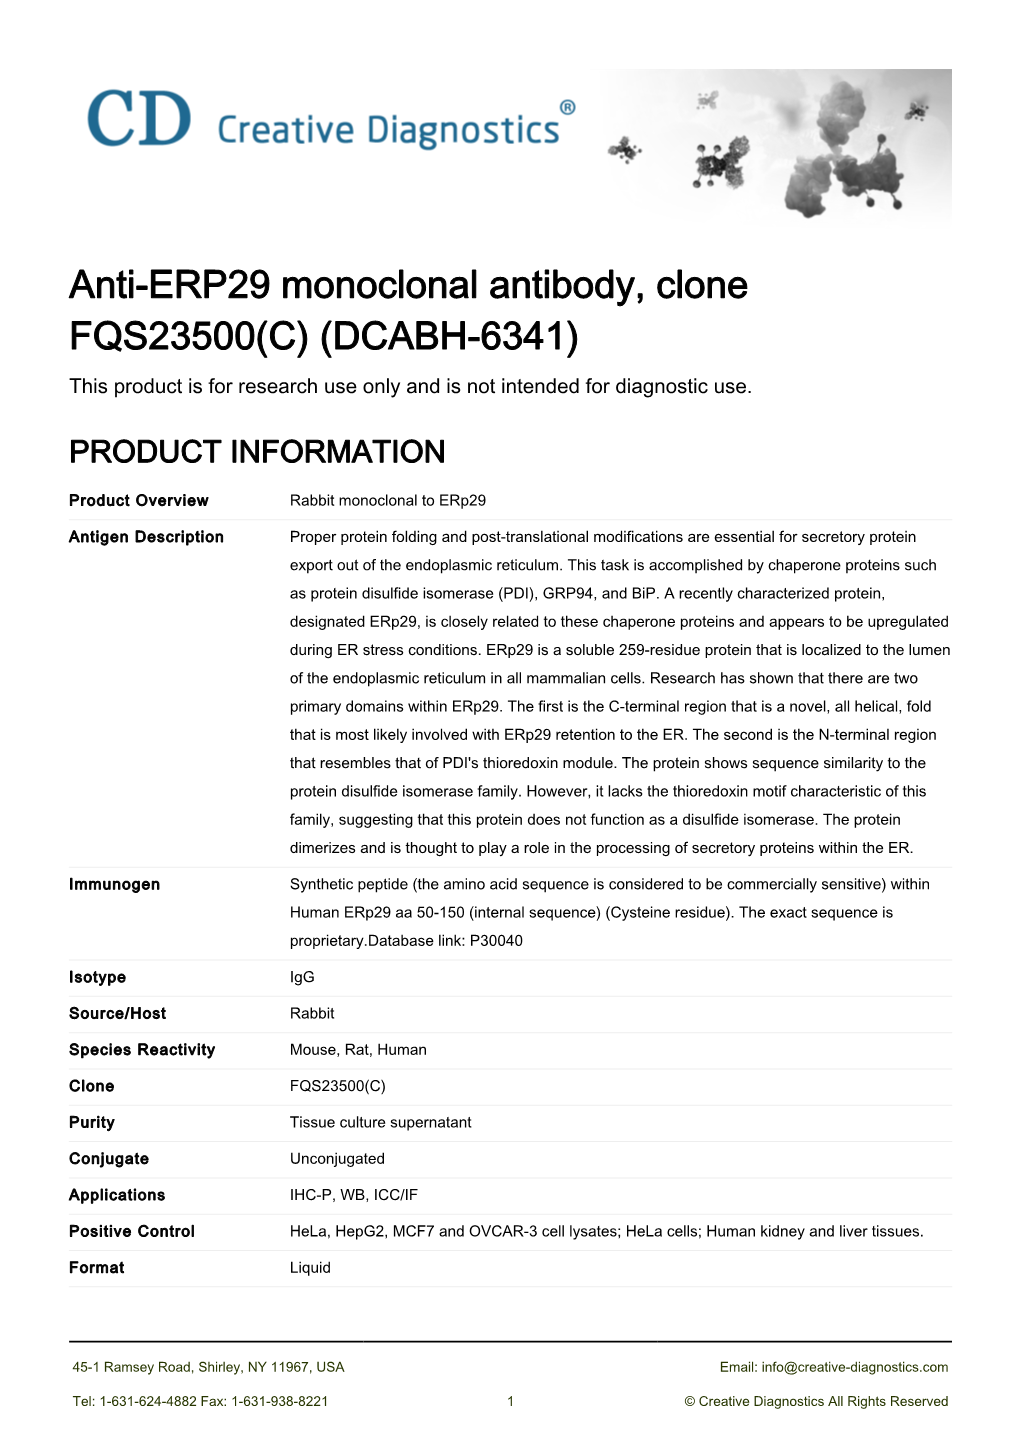 Anti-ERP29 Monoclonal Antibody, Clone FQS23500(C) (DCABH-6341) This Product Is for Research Use Only and Is Not Intended for Diagnostic Use